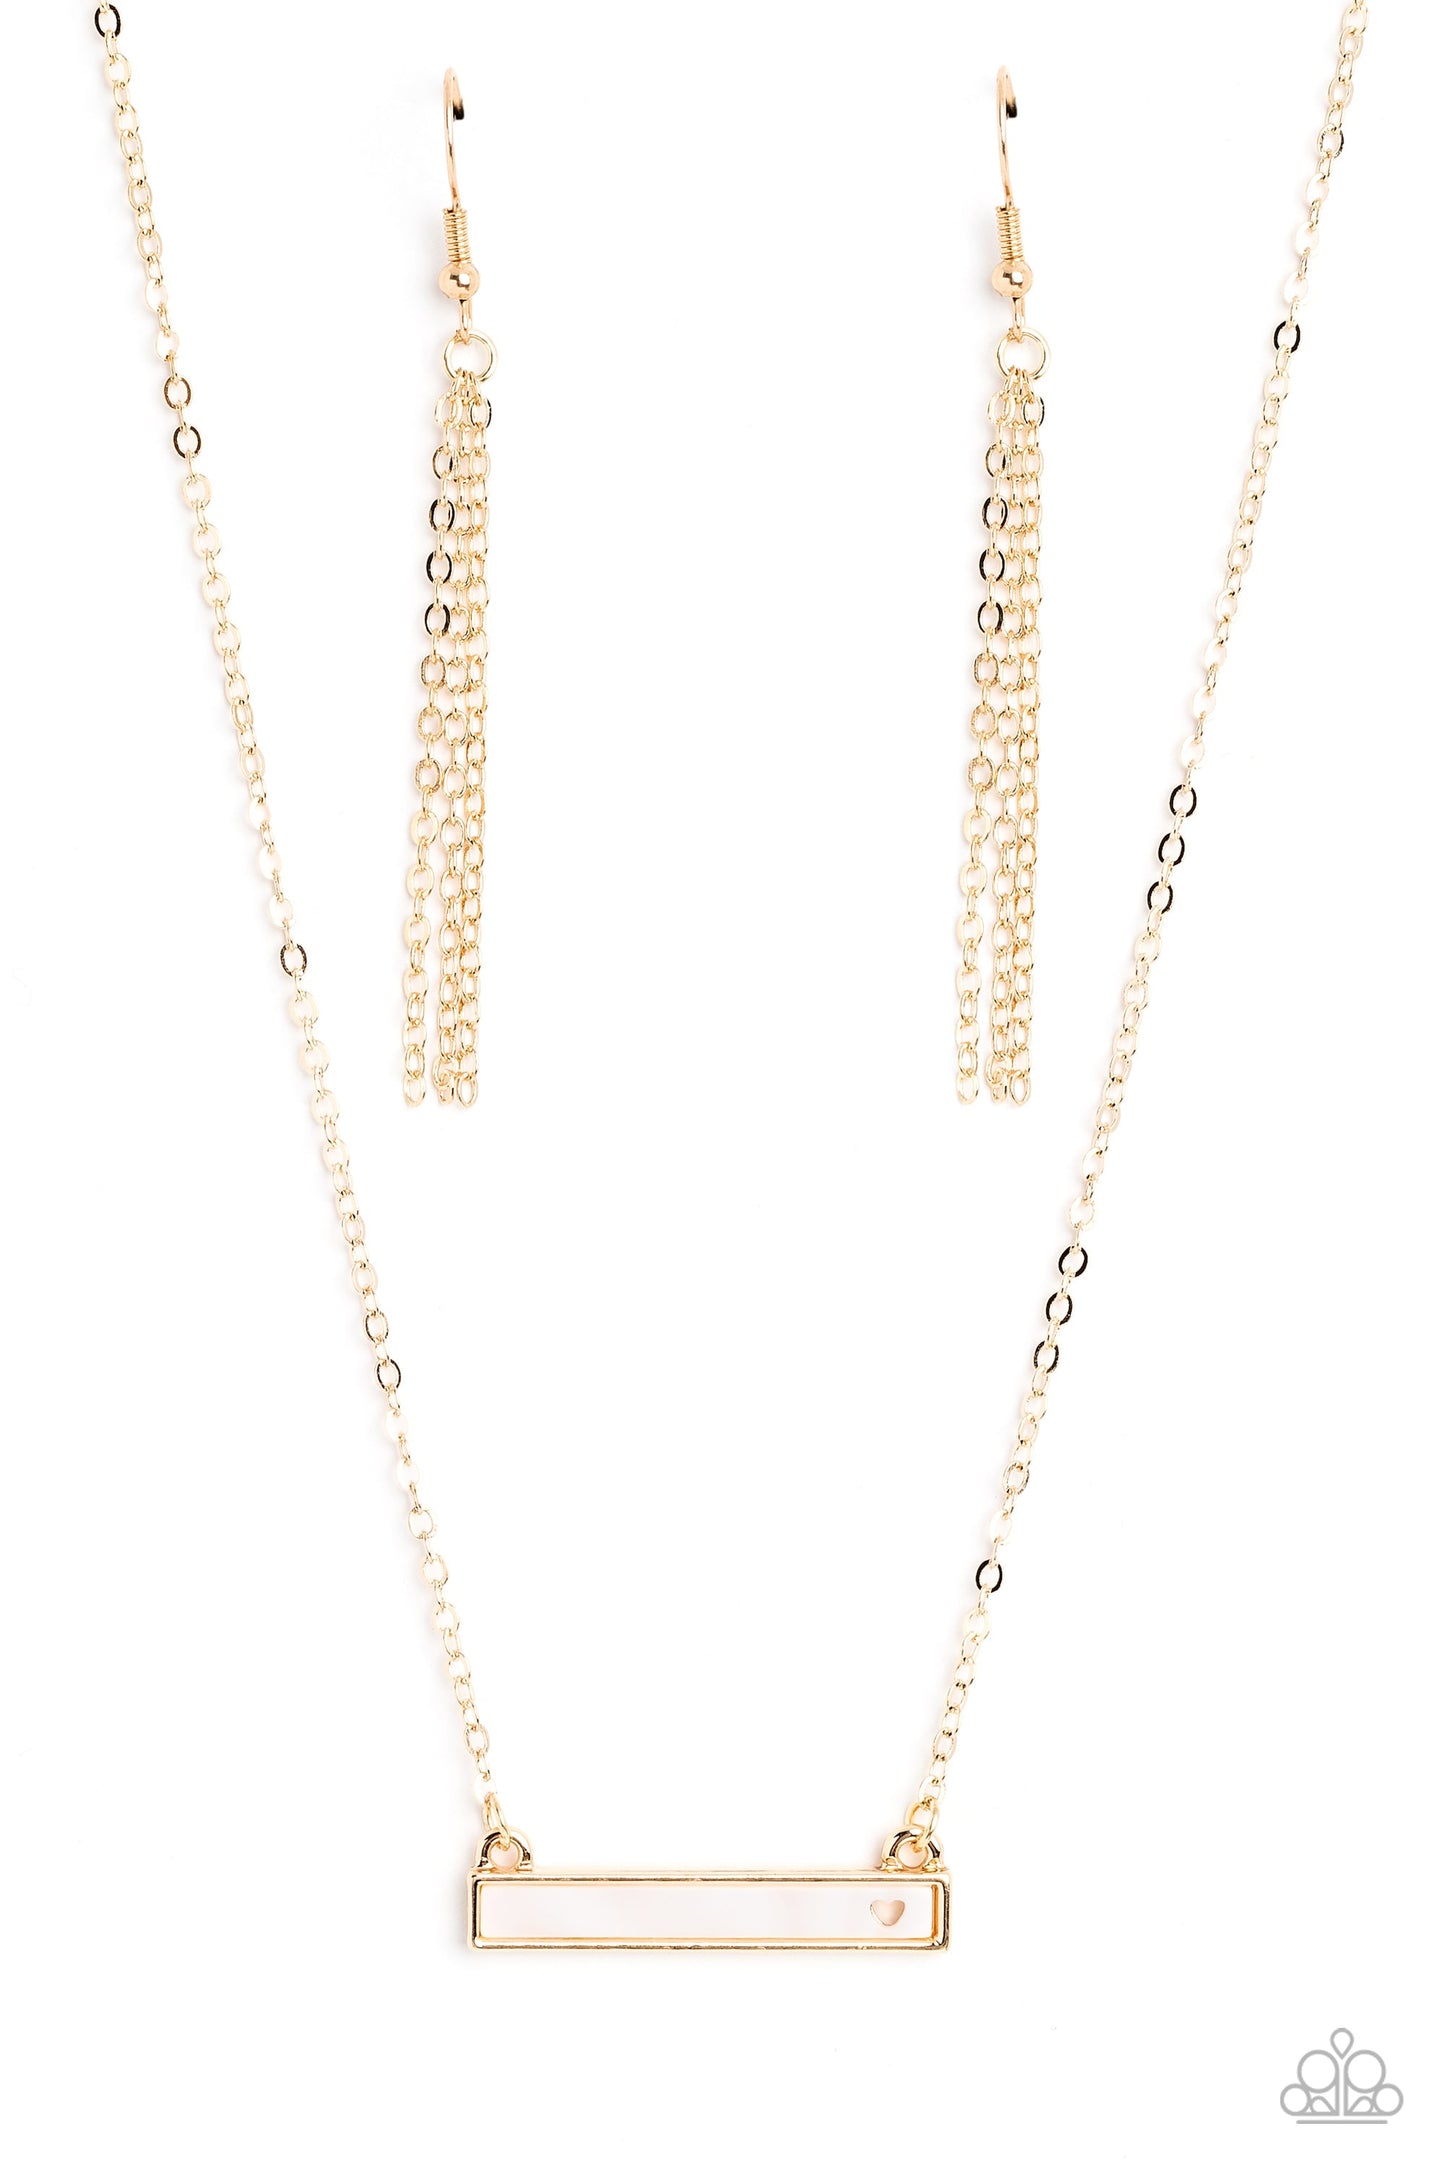 Devoted Darling - Gold Plate/Rectangular White Shell/Dainty Heart Cutout Pendant Paparazzi Necklace & matching earrings